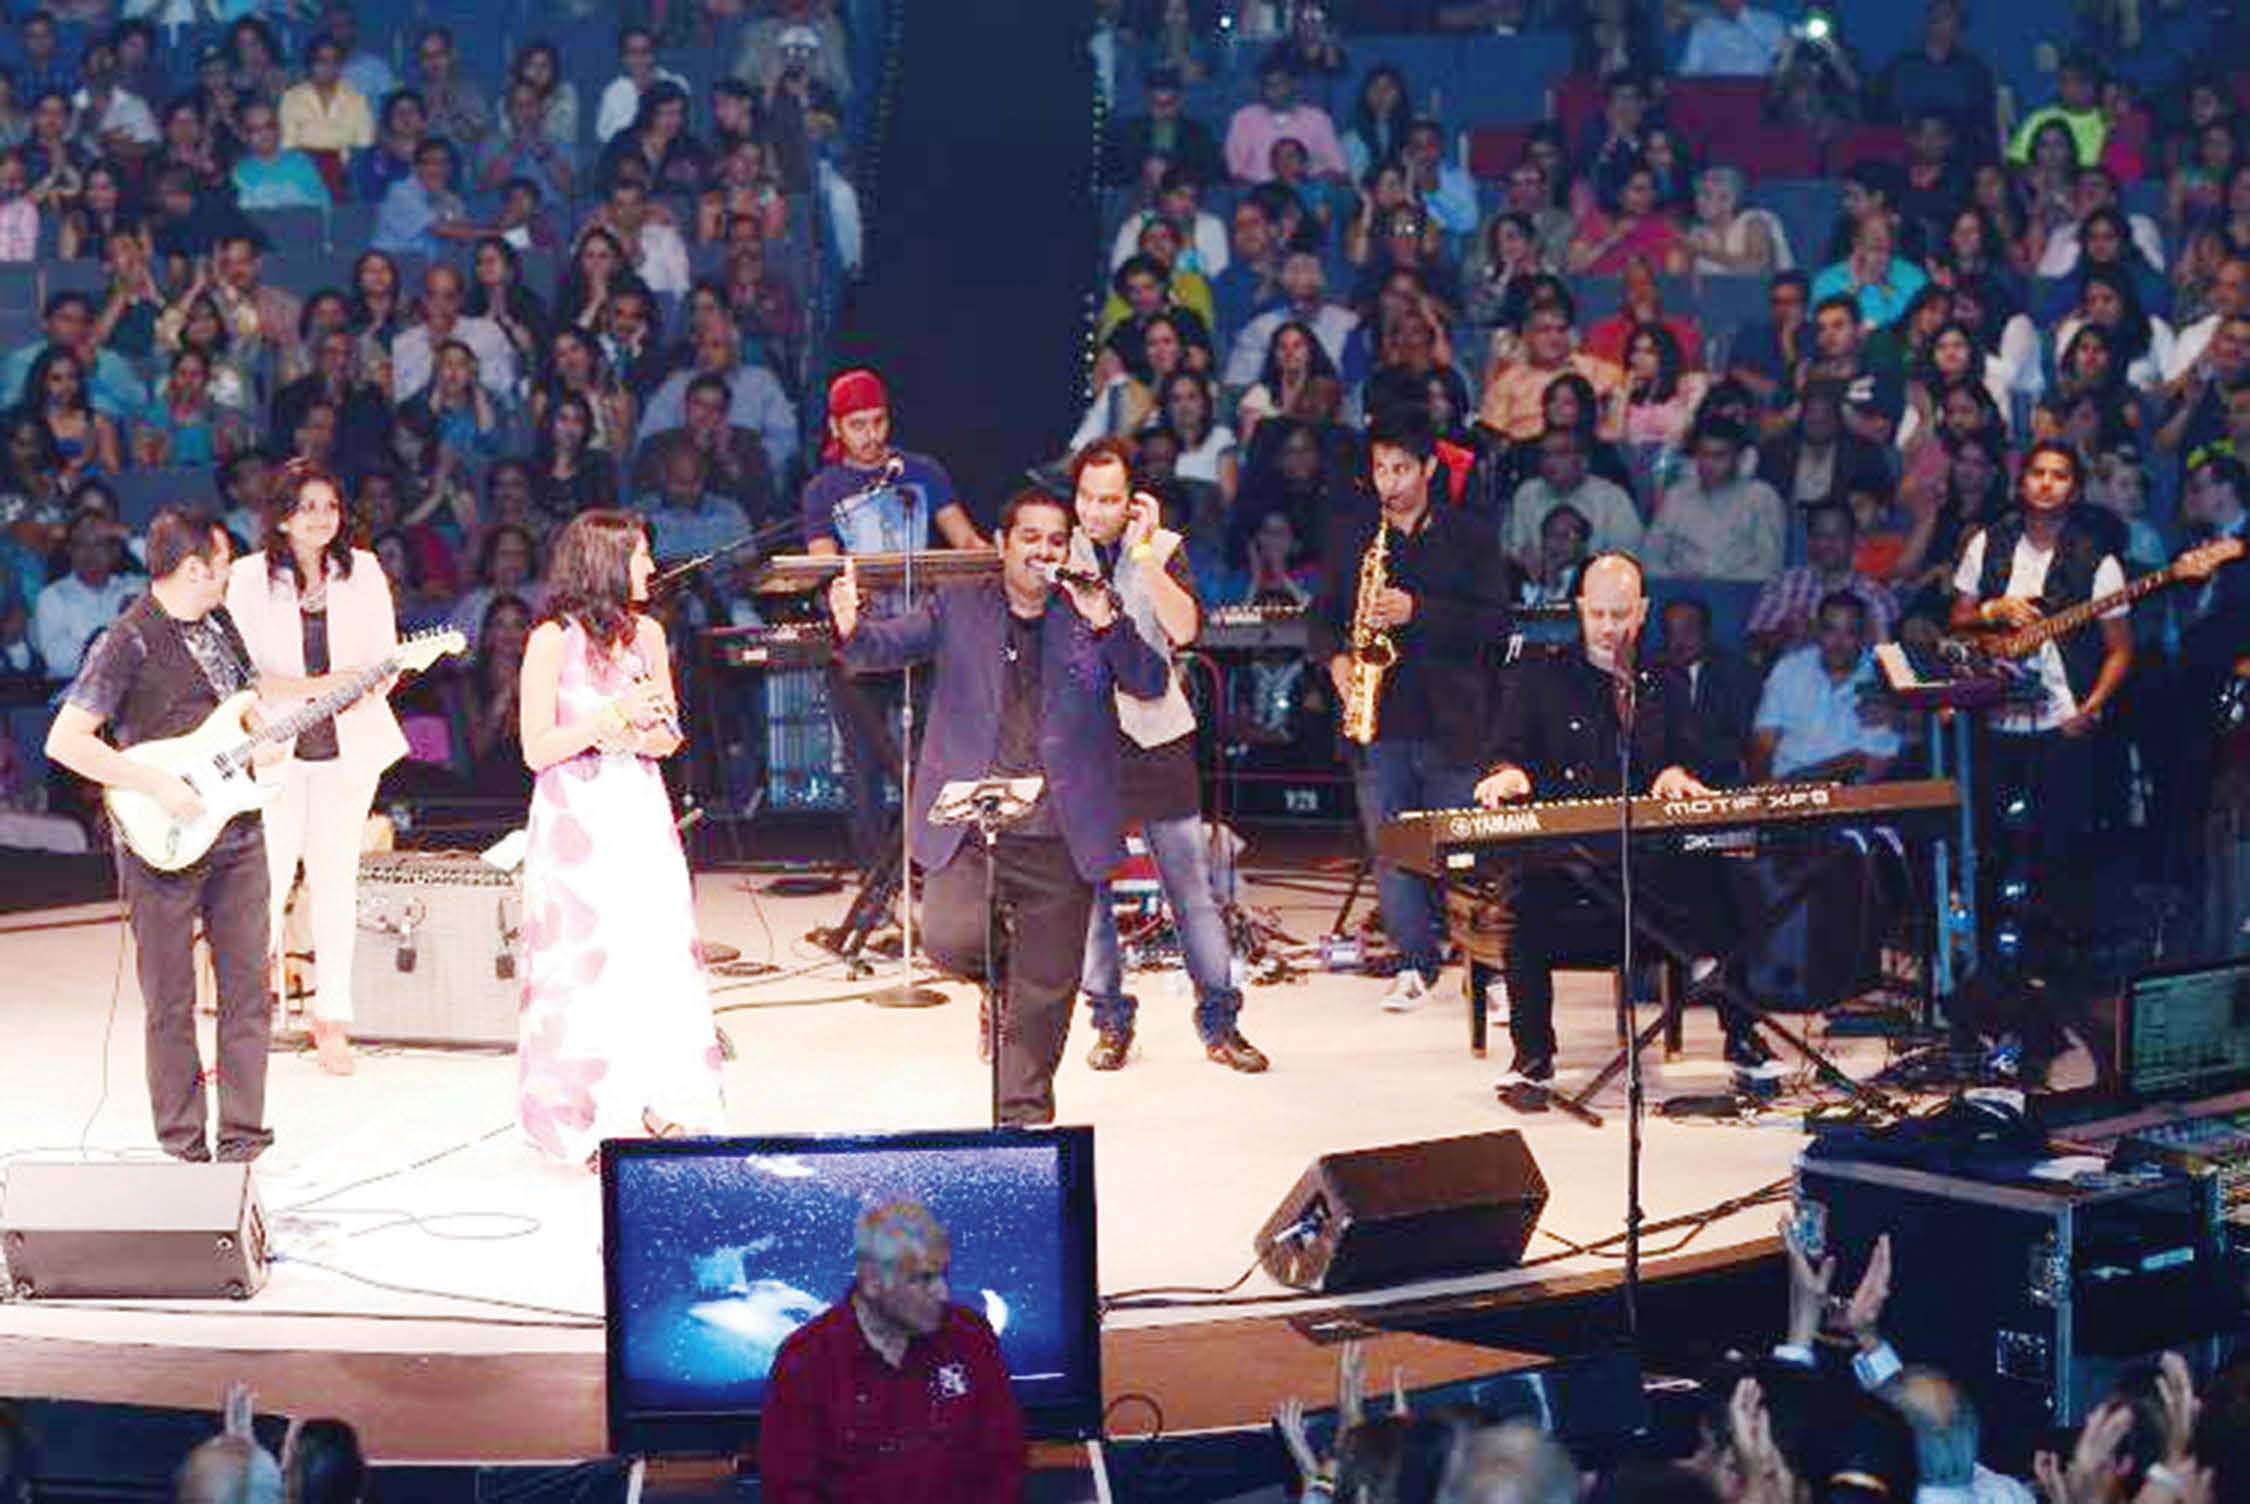 Shankar Ehsaan Loy, the musical trio performing during AAPI's Nine City Tour & Regional Conferences in 2013 (File photo)